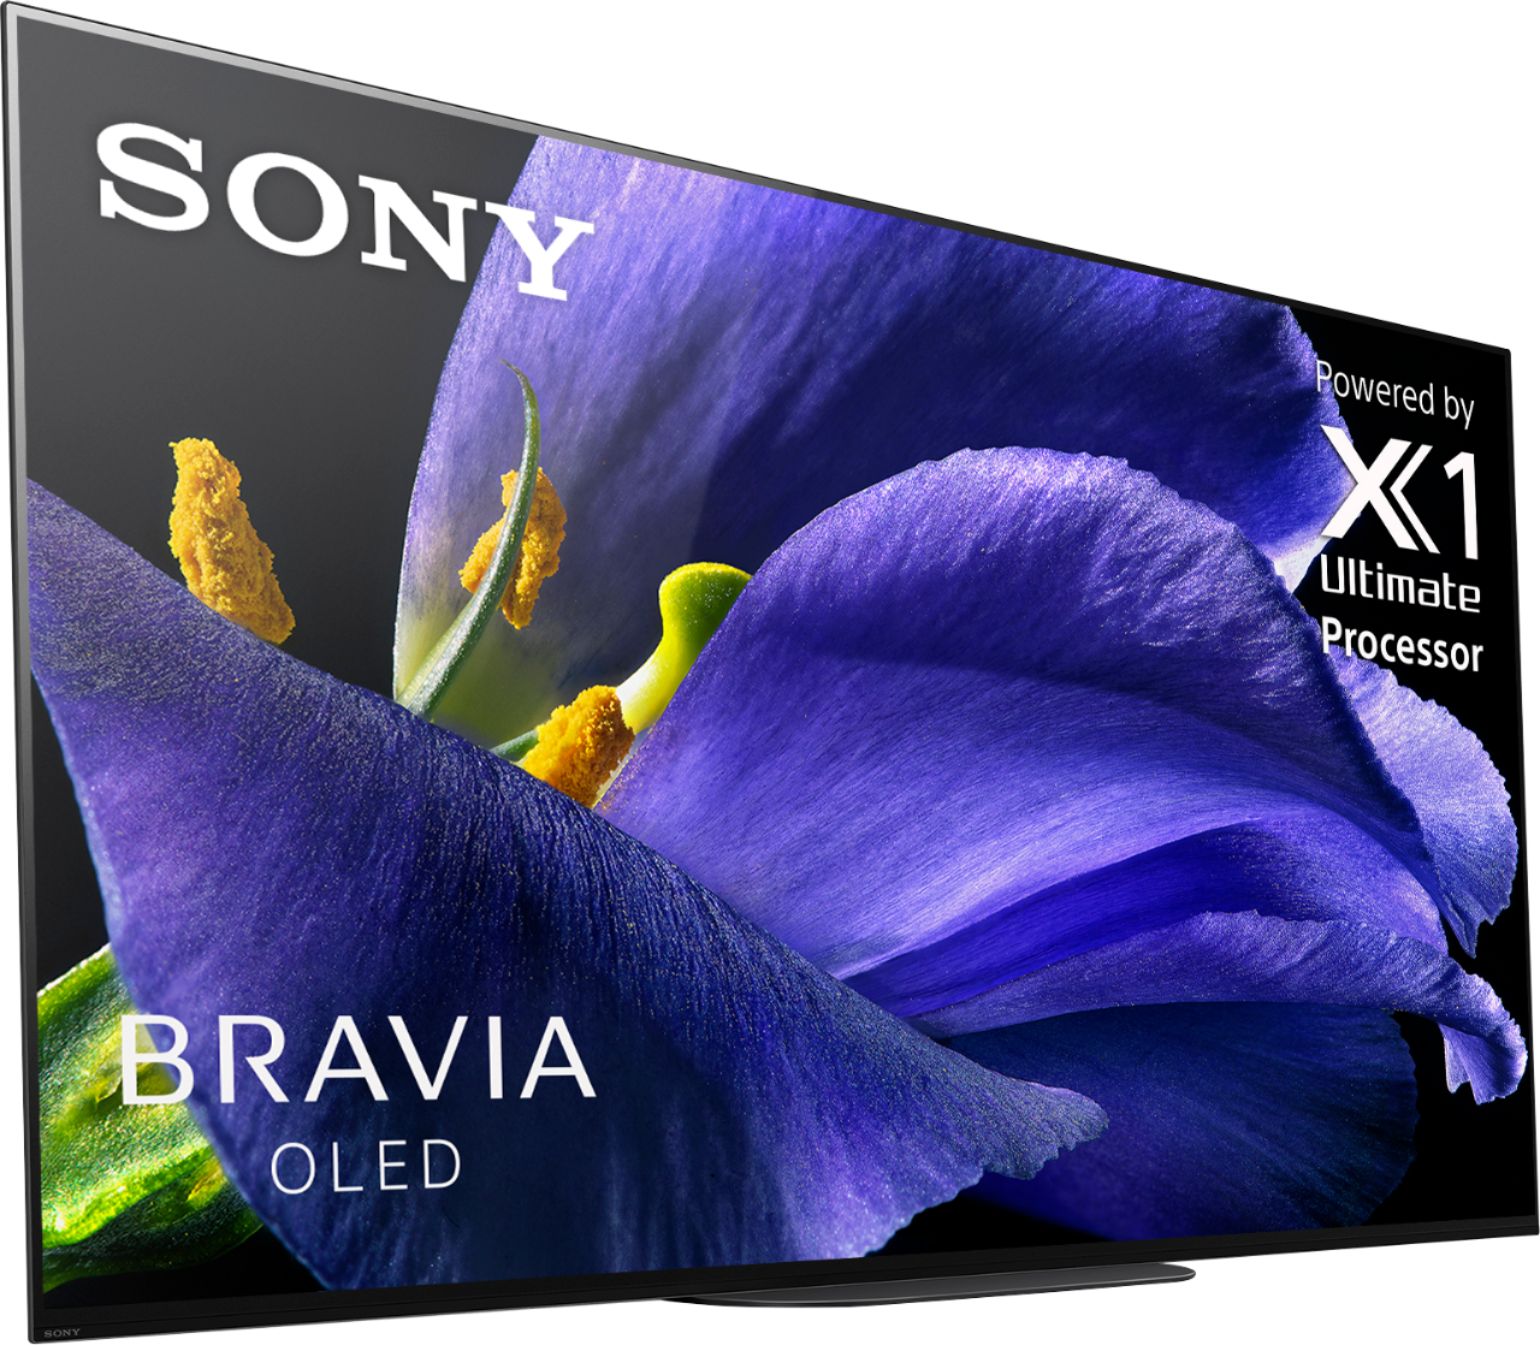 Angle View: Sony - 77" Class A9G MASTER Series OLED 4K UHD Smart Android TV